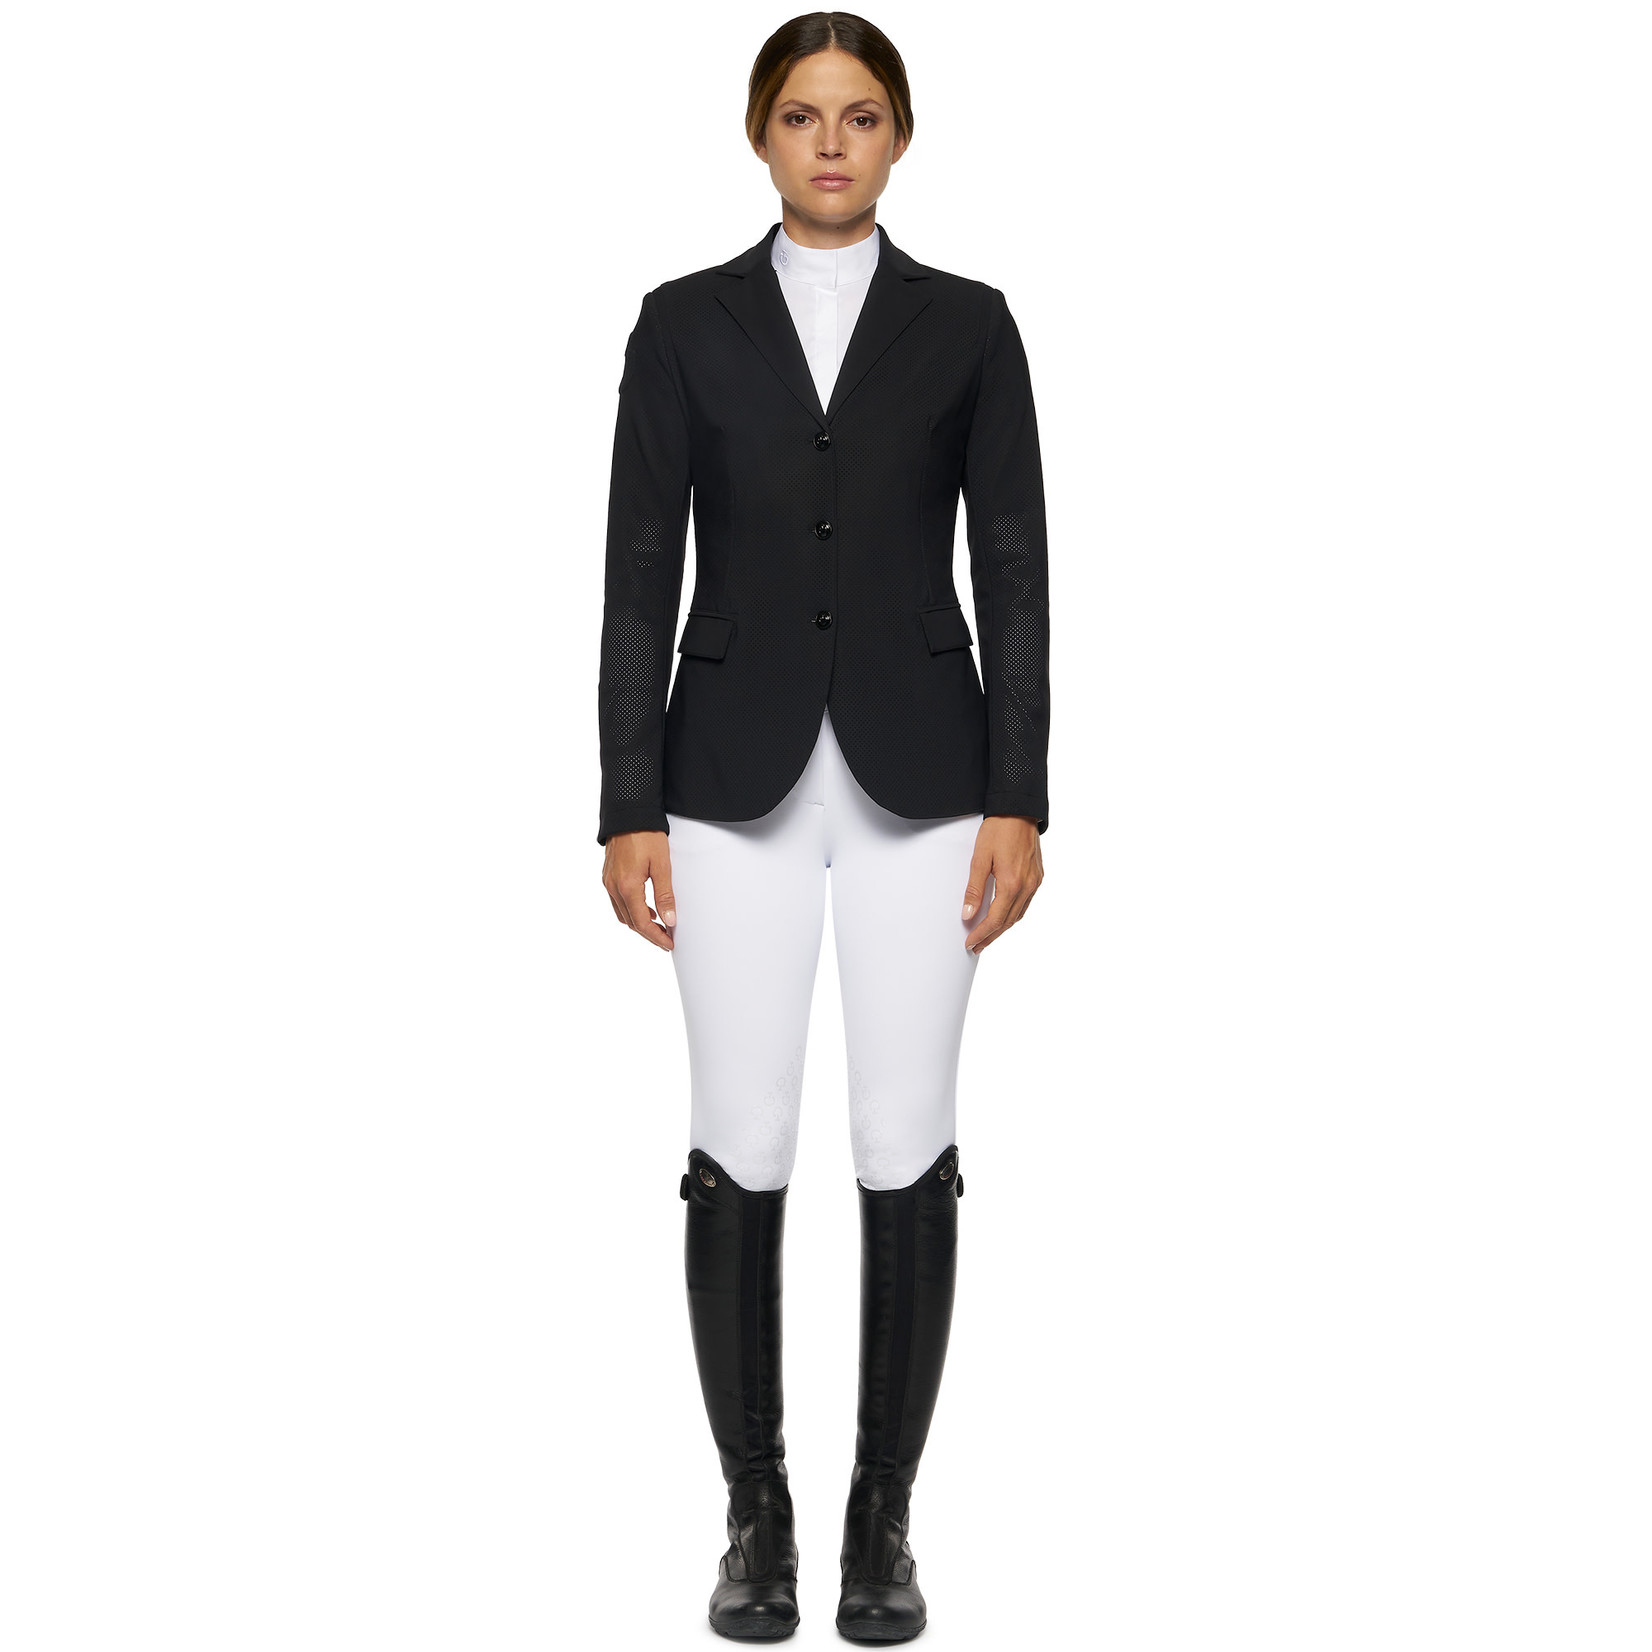 Cavalleria Toscana GGD025 Cavalleria Toscana Women's Perforated Competition Jacket